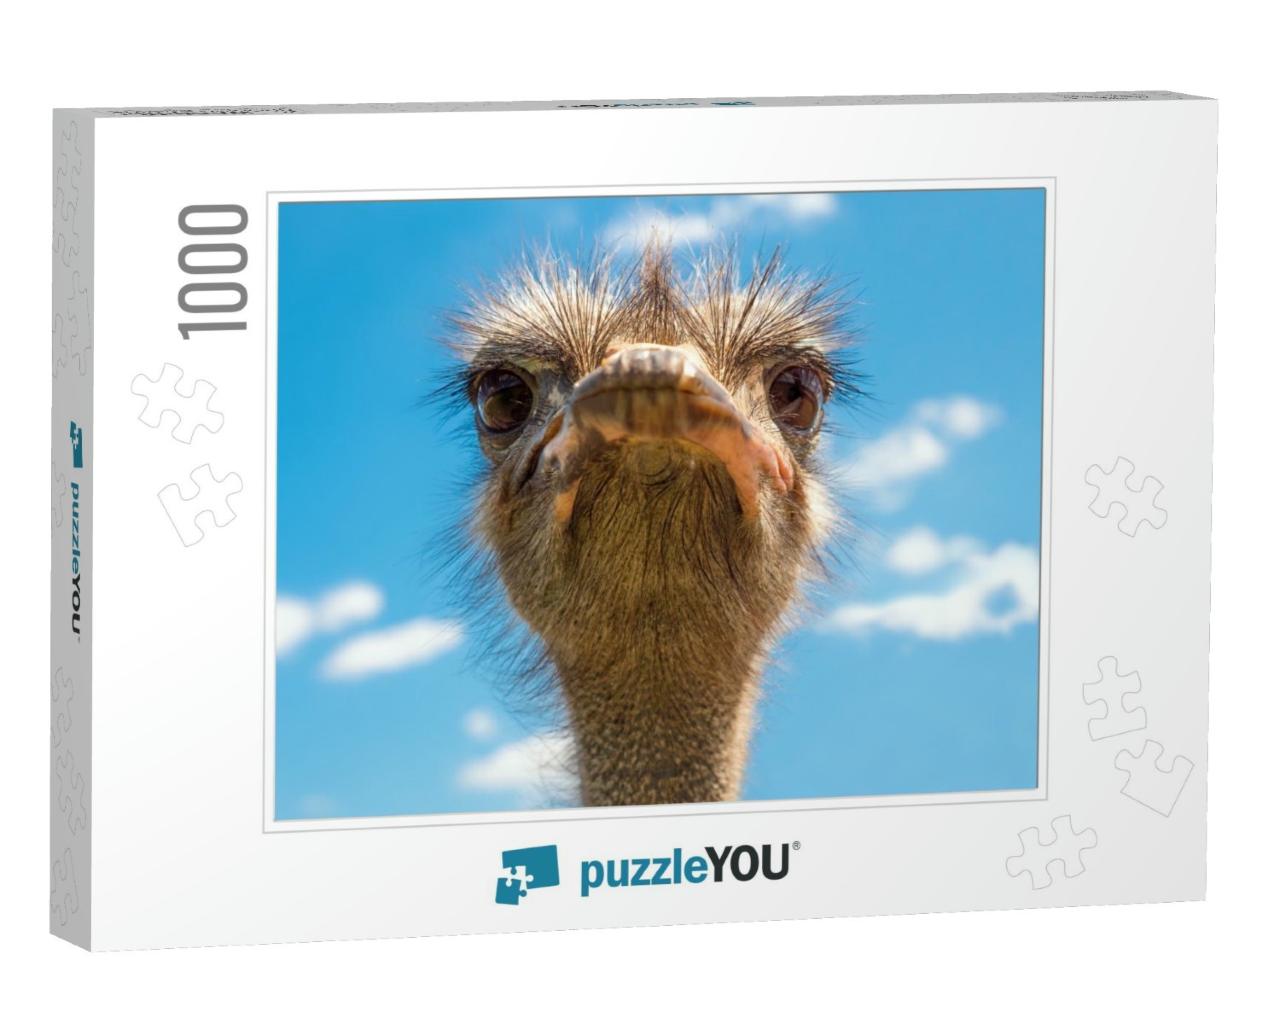 Head of Ostrich on Clear Sky Backdrop. Beak of Ostrich. P... Jigsaw Puzzle with 1000 pieces